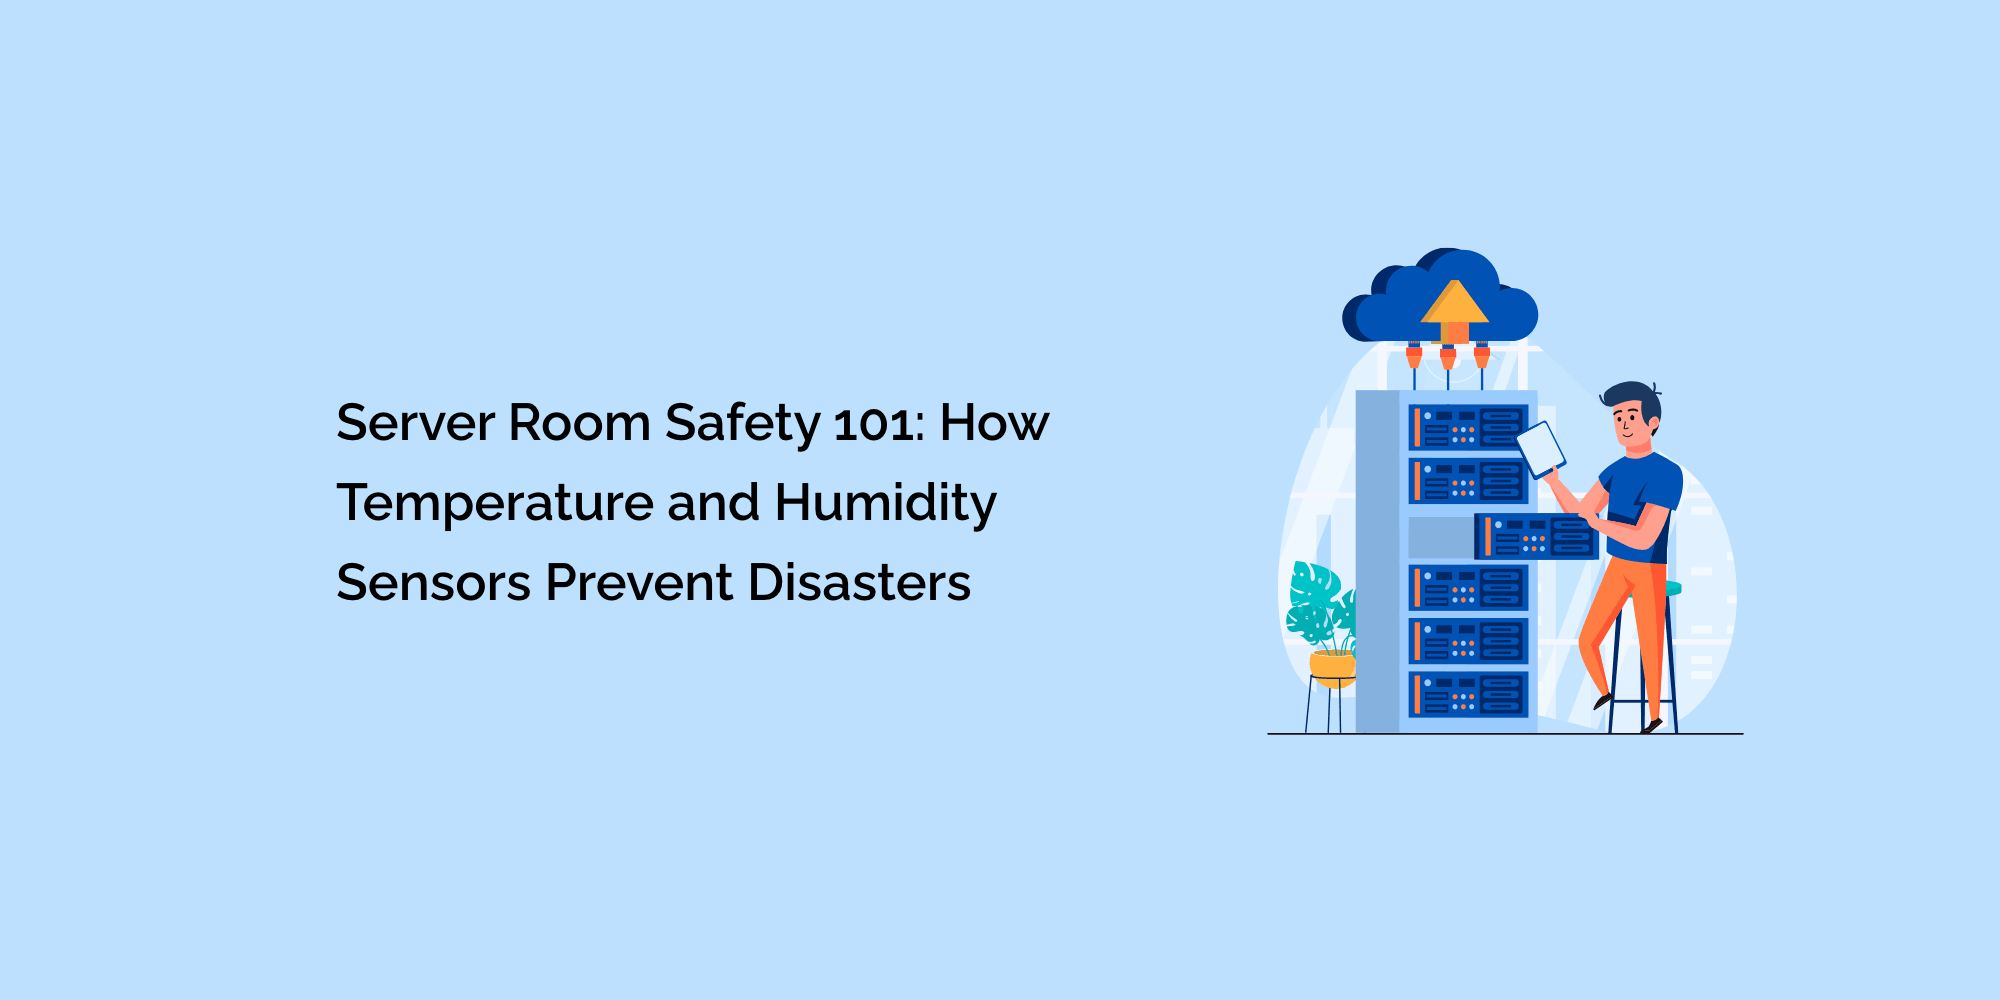 Server Room Safety 101: How Temperature and Humidity Sensors Prevent Disasters